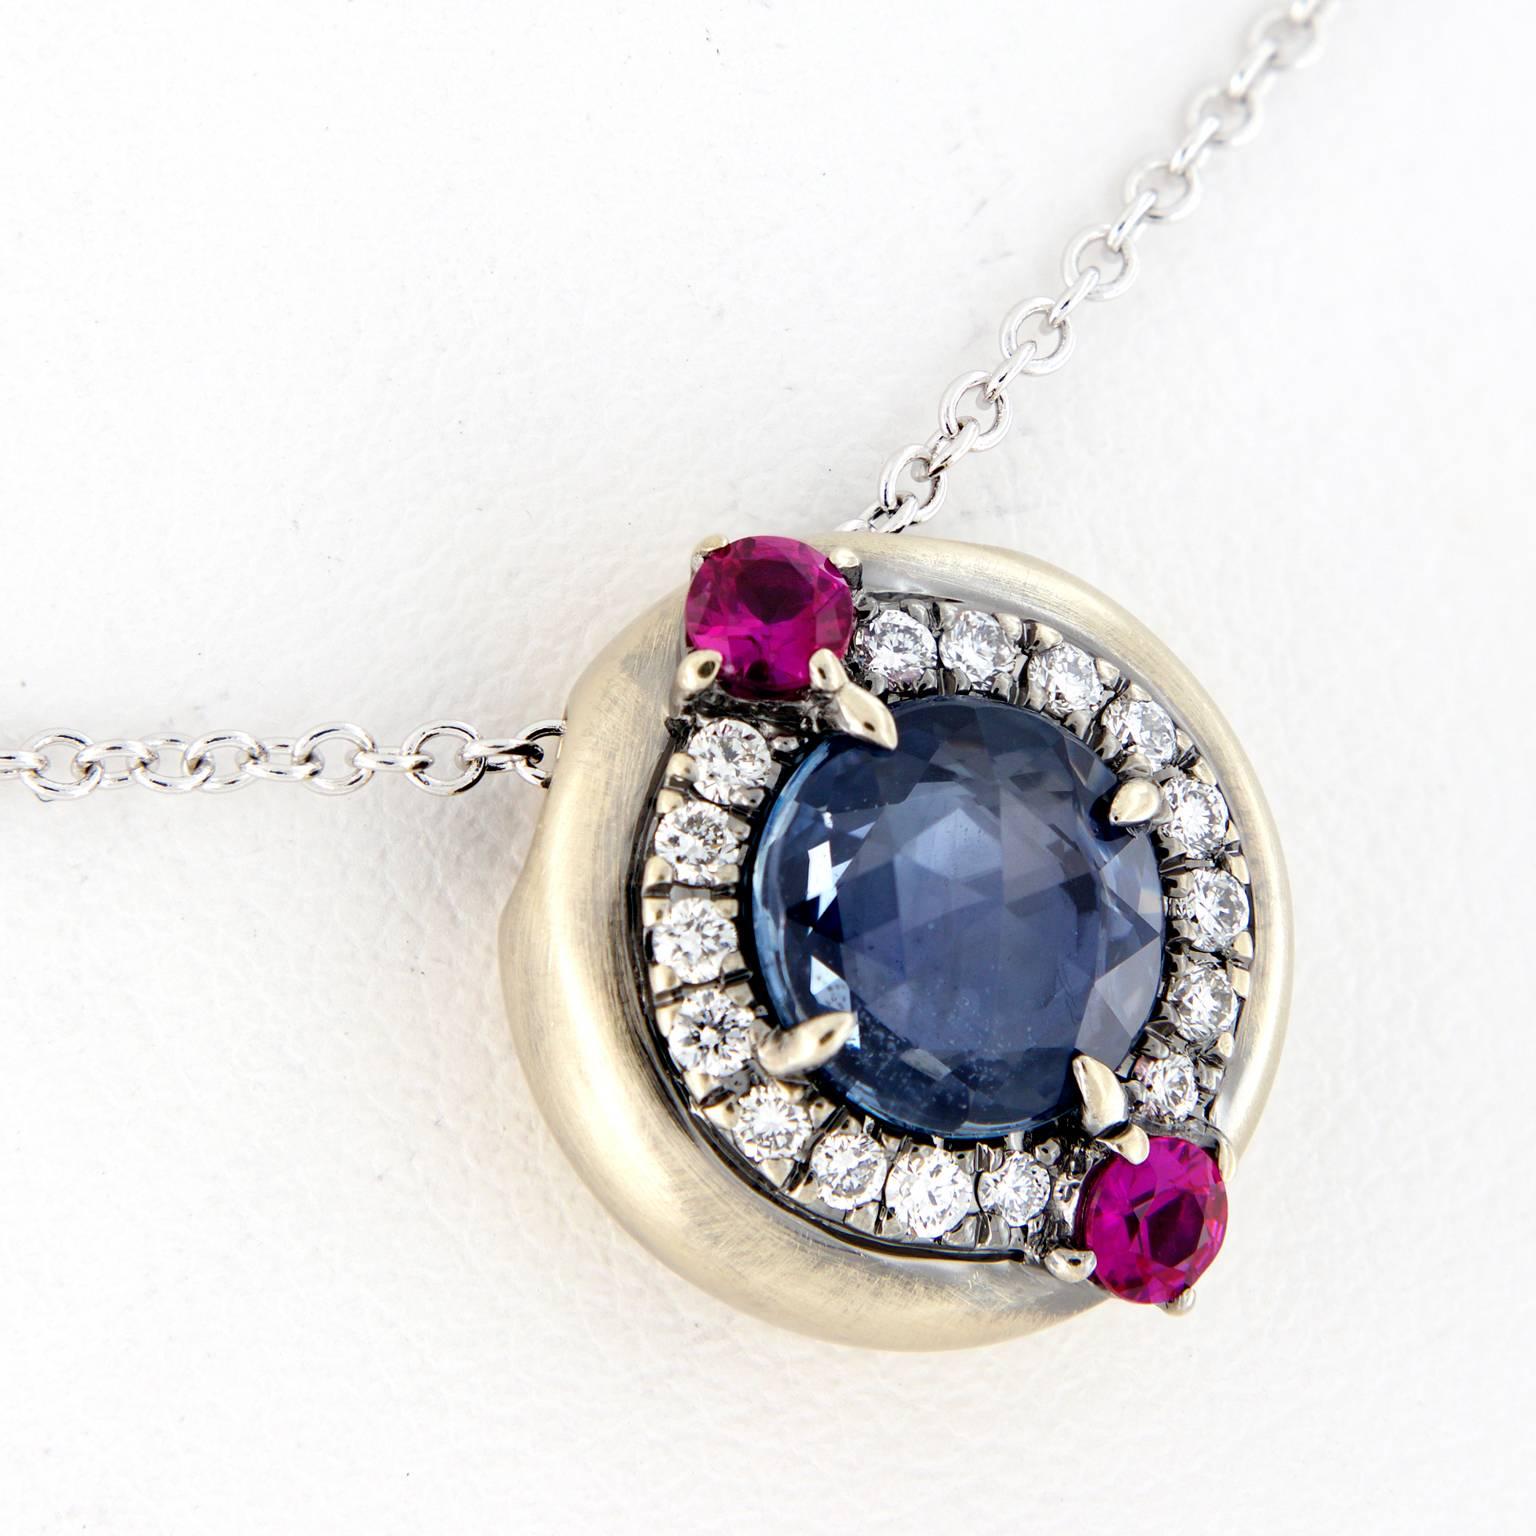 Danhier’s Galaxy pendant necklace from the Evolution Collection centers around a round rose-cut blue sapphire, enhanced with a halo of white diamonds and two rubies. 18 inch chain is 18k white gold and pendant features a hand-rubbed patina. Pendant